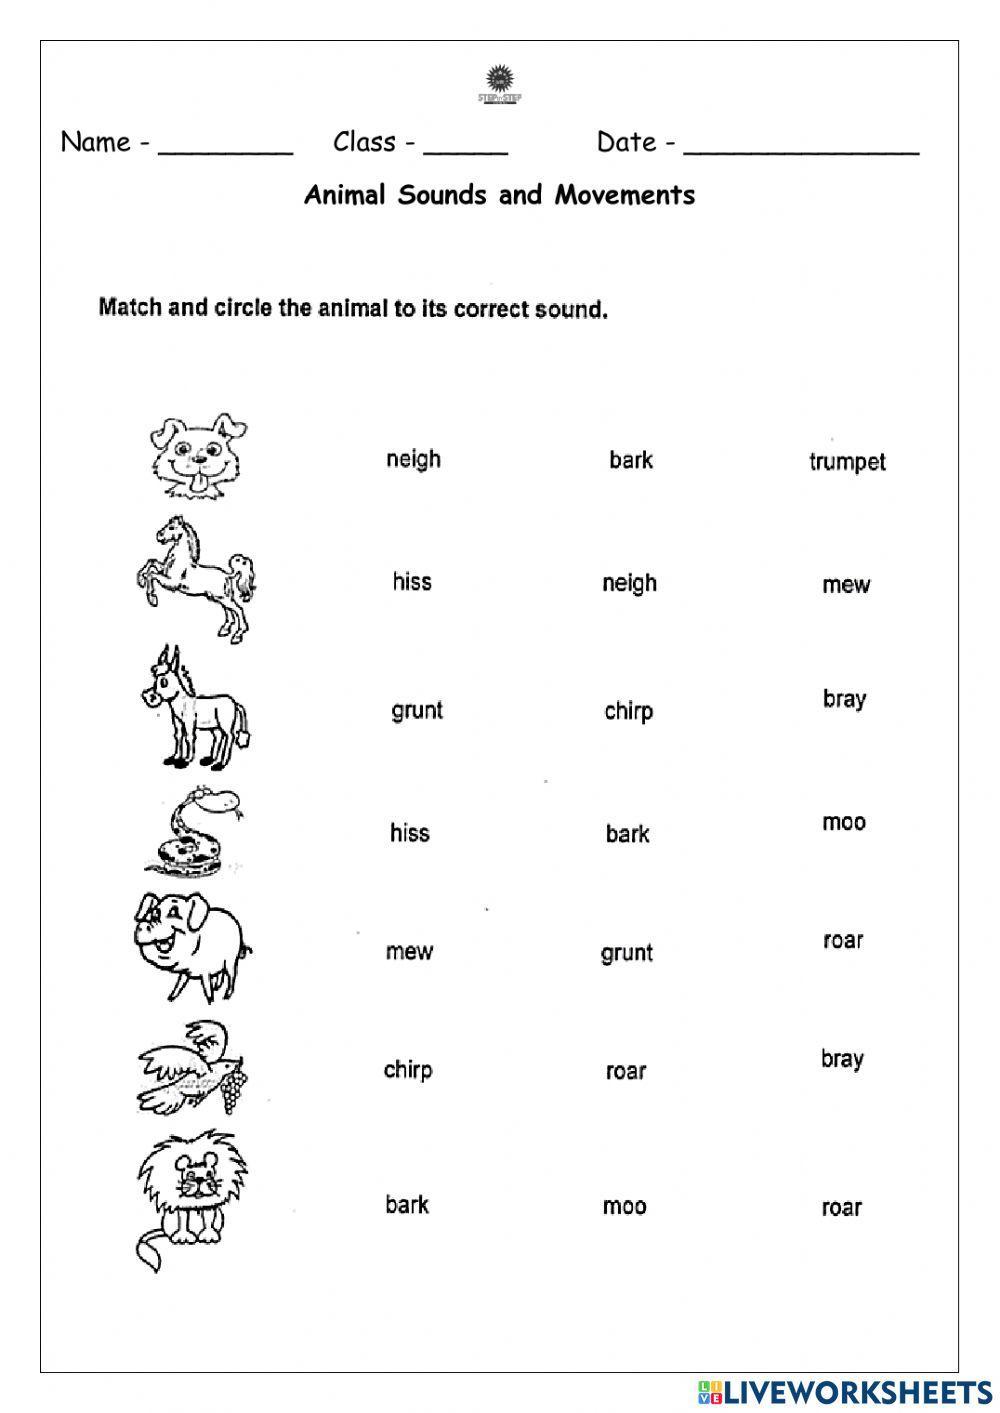 2 C Animal sounds and Movements